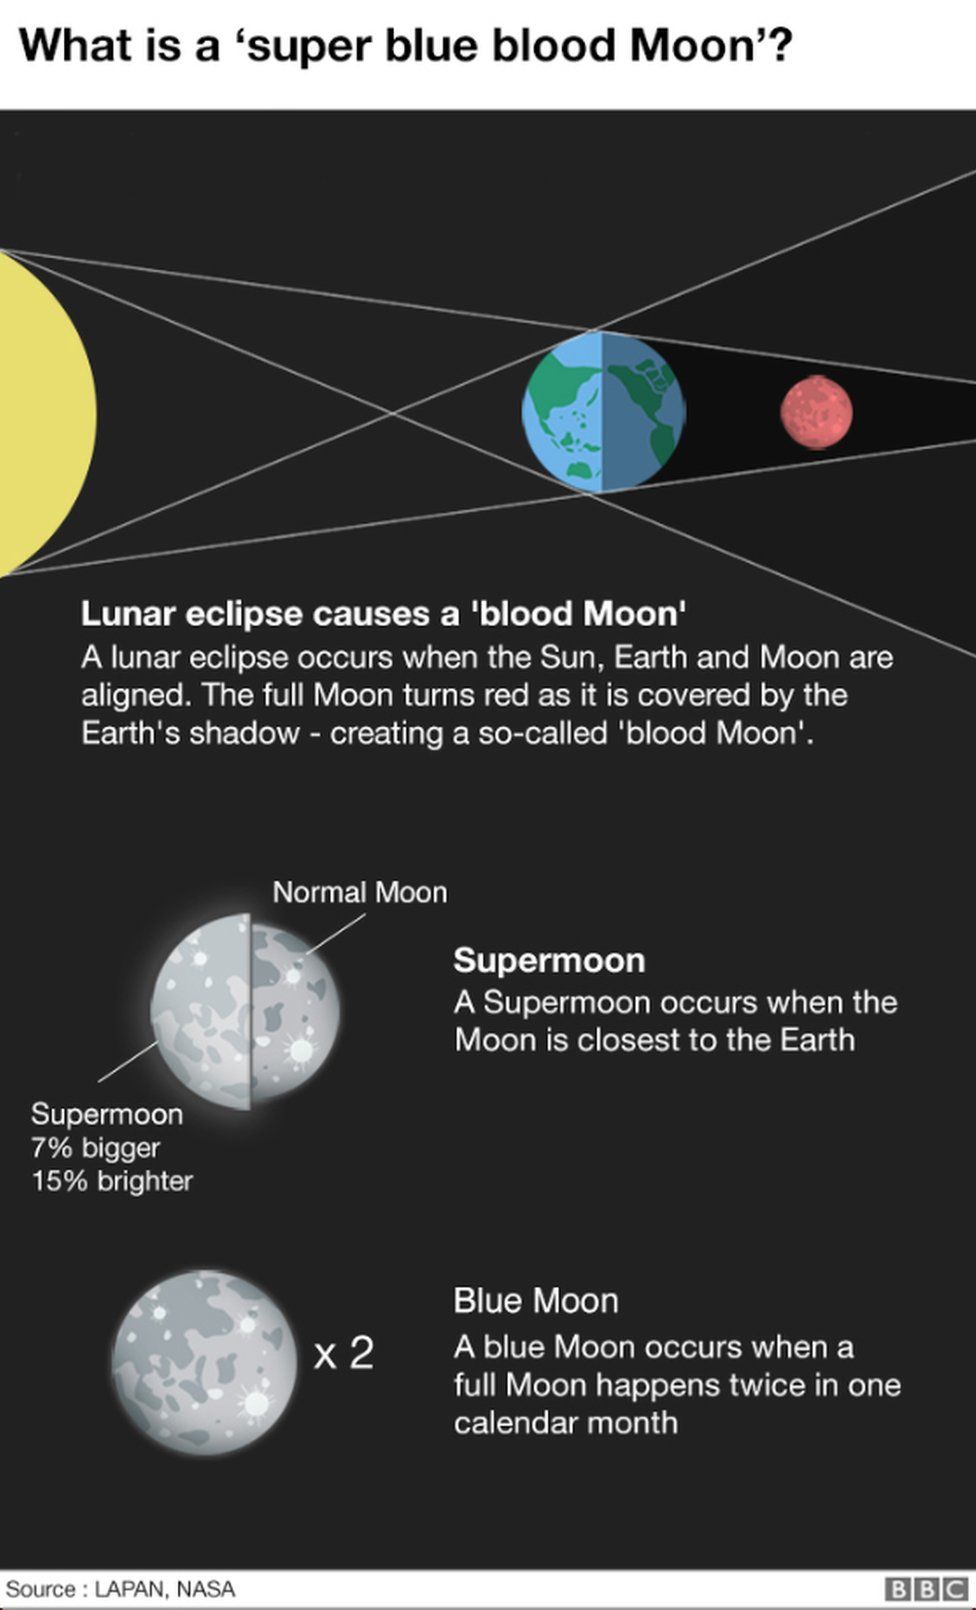 Graphic: what is a 'super blue blood Moon'?